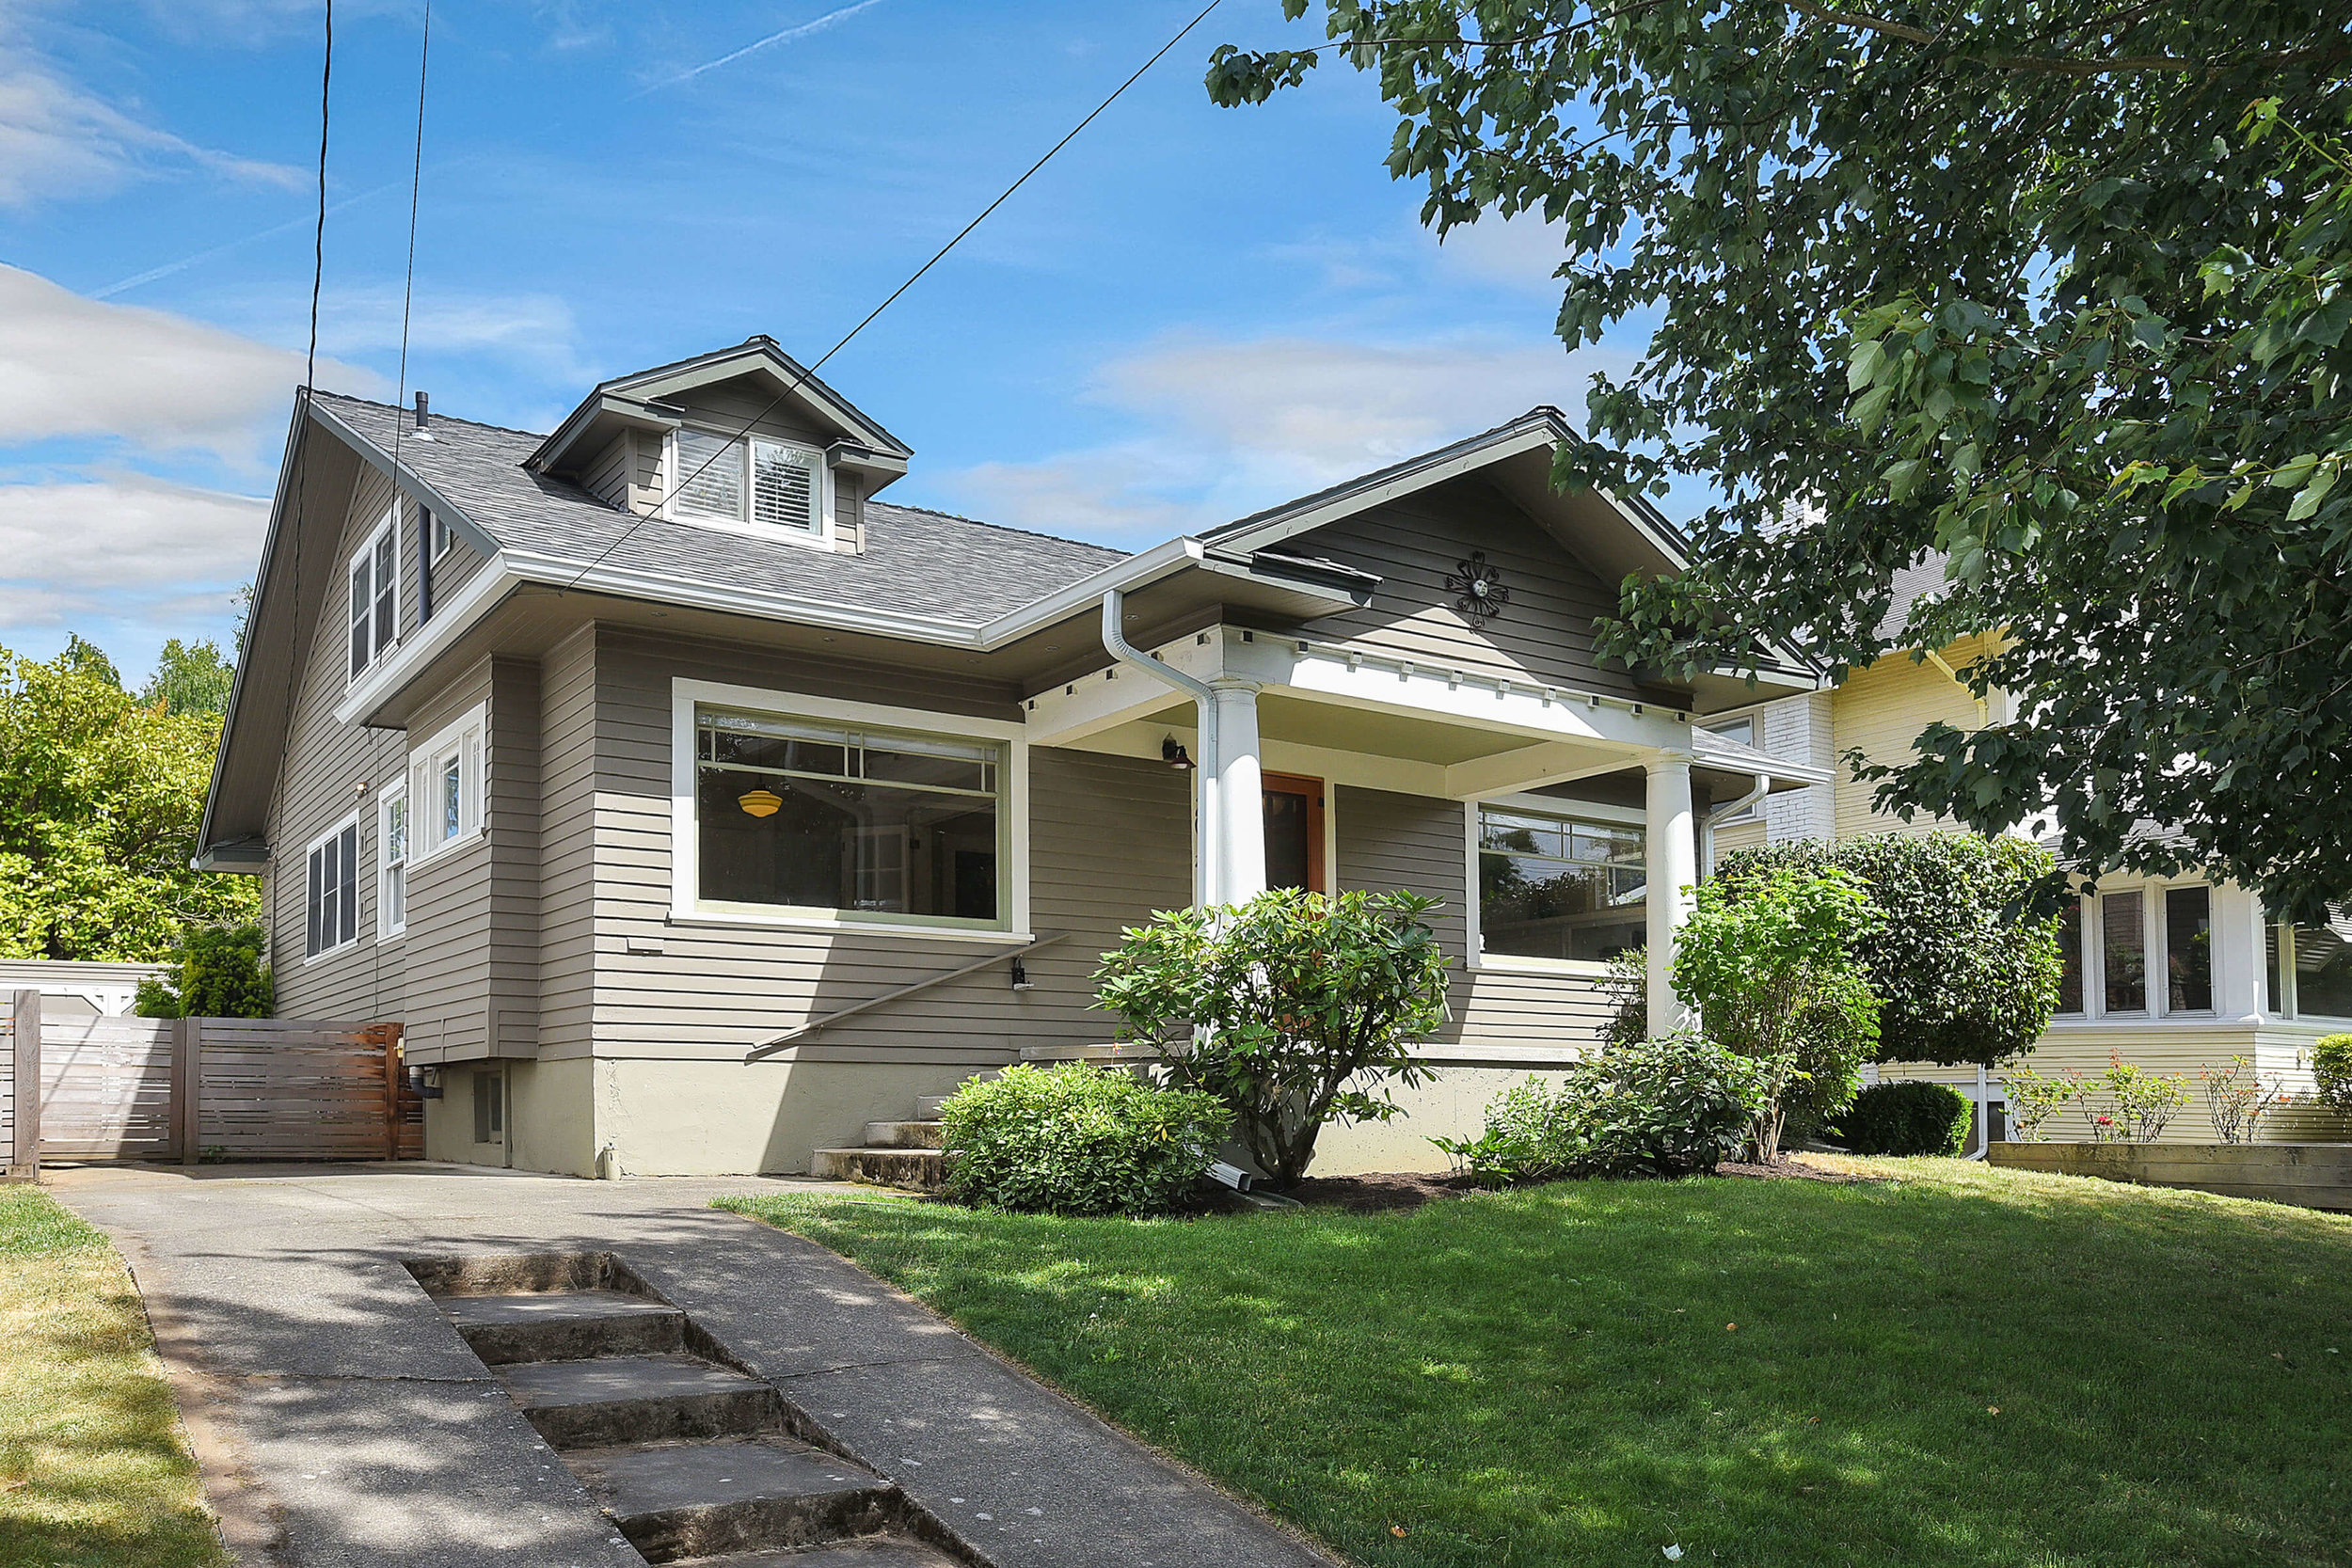 2014 NE 48th Ave. &lt;strong&gt;SOLD&lt;/strong&gt;